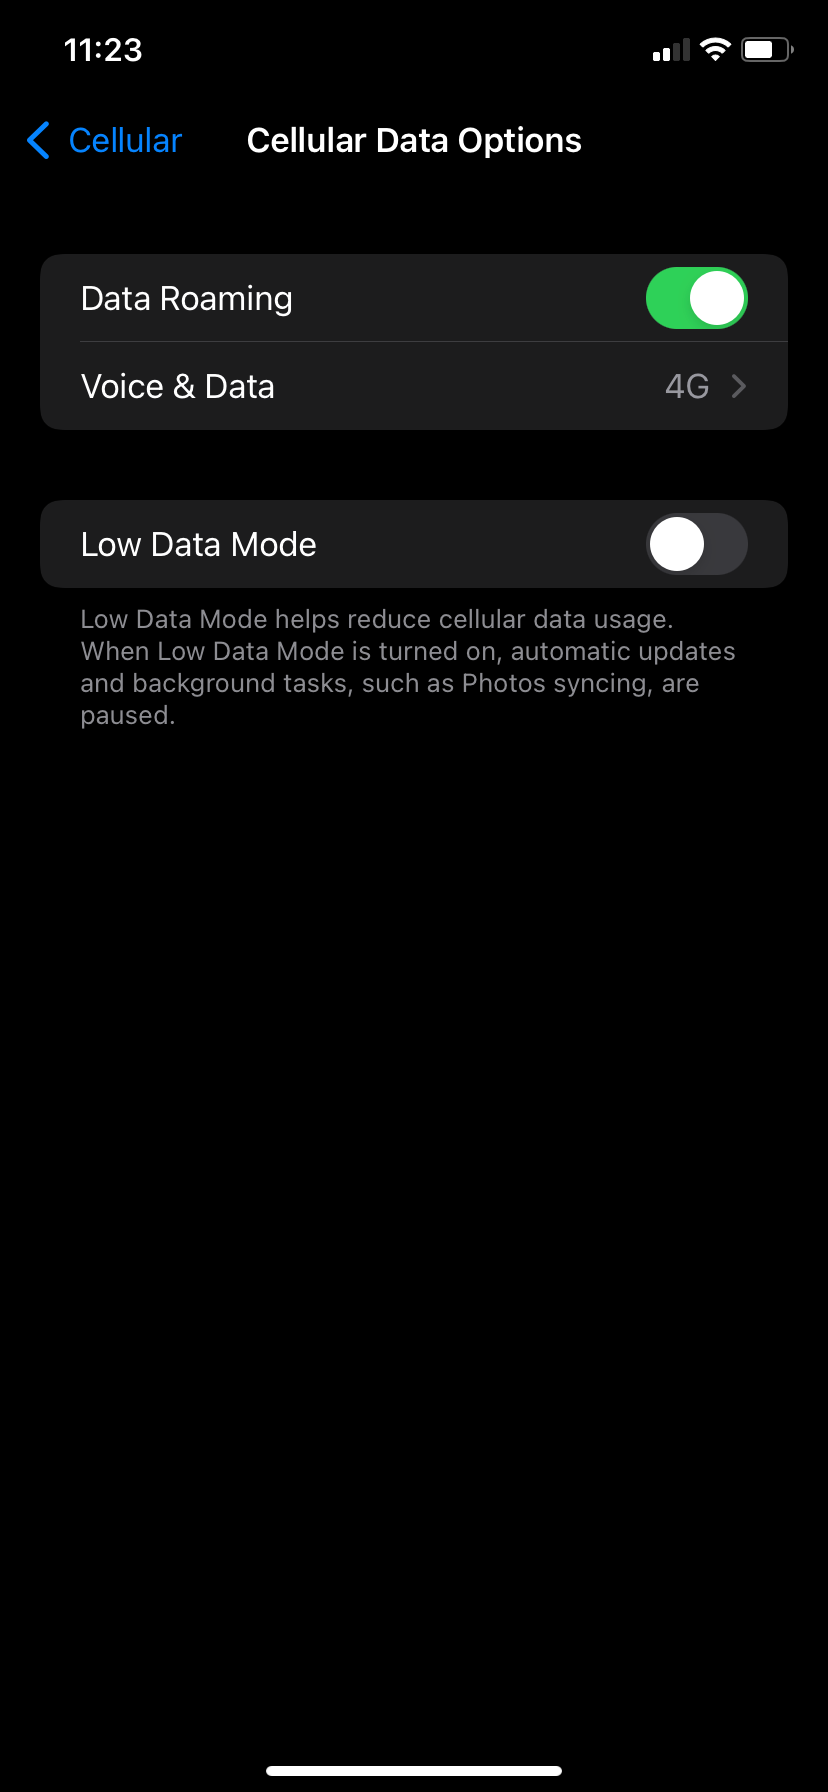 Cellular data options on iPhone.